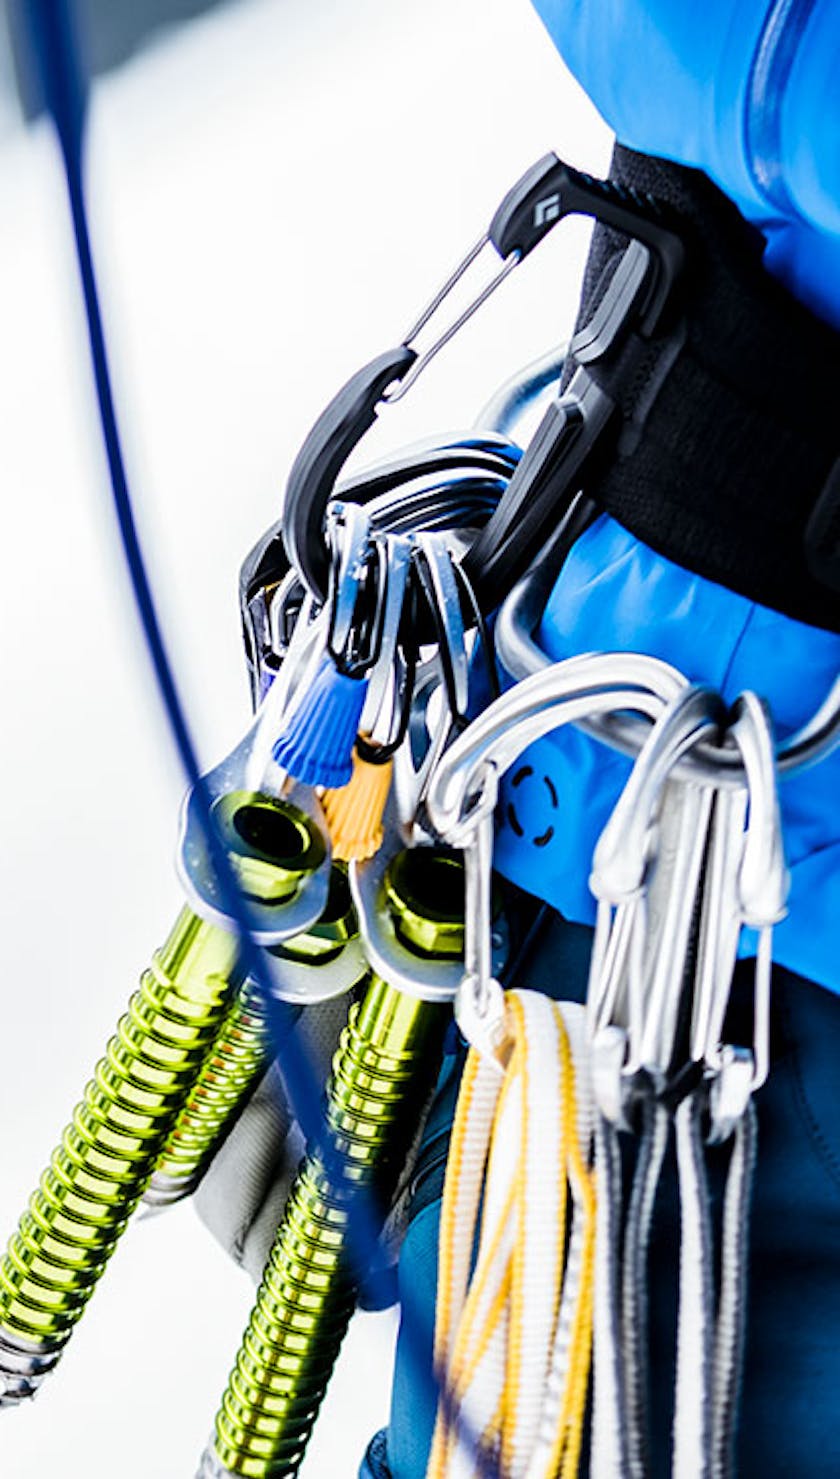 ice climbing gear hanging from harness